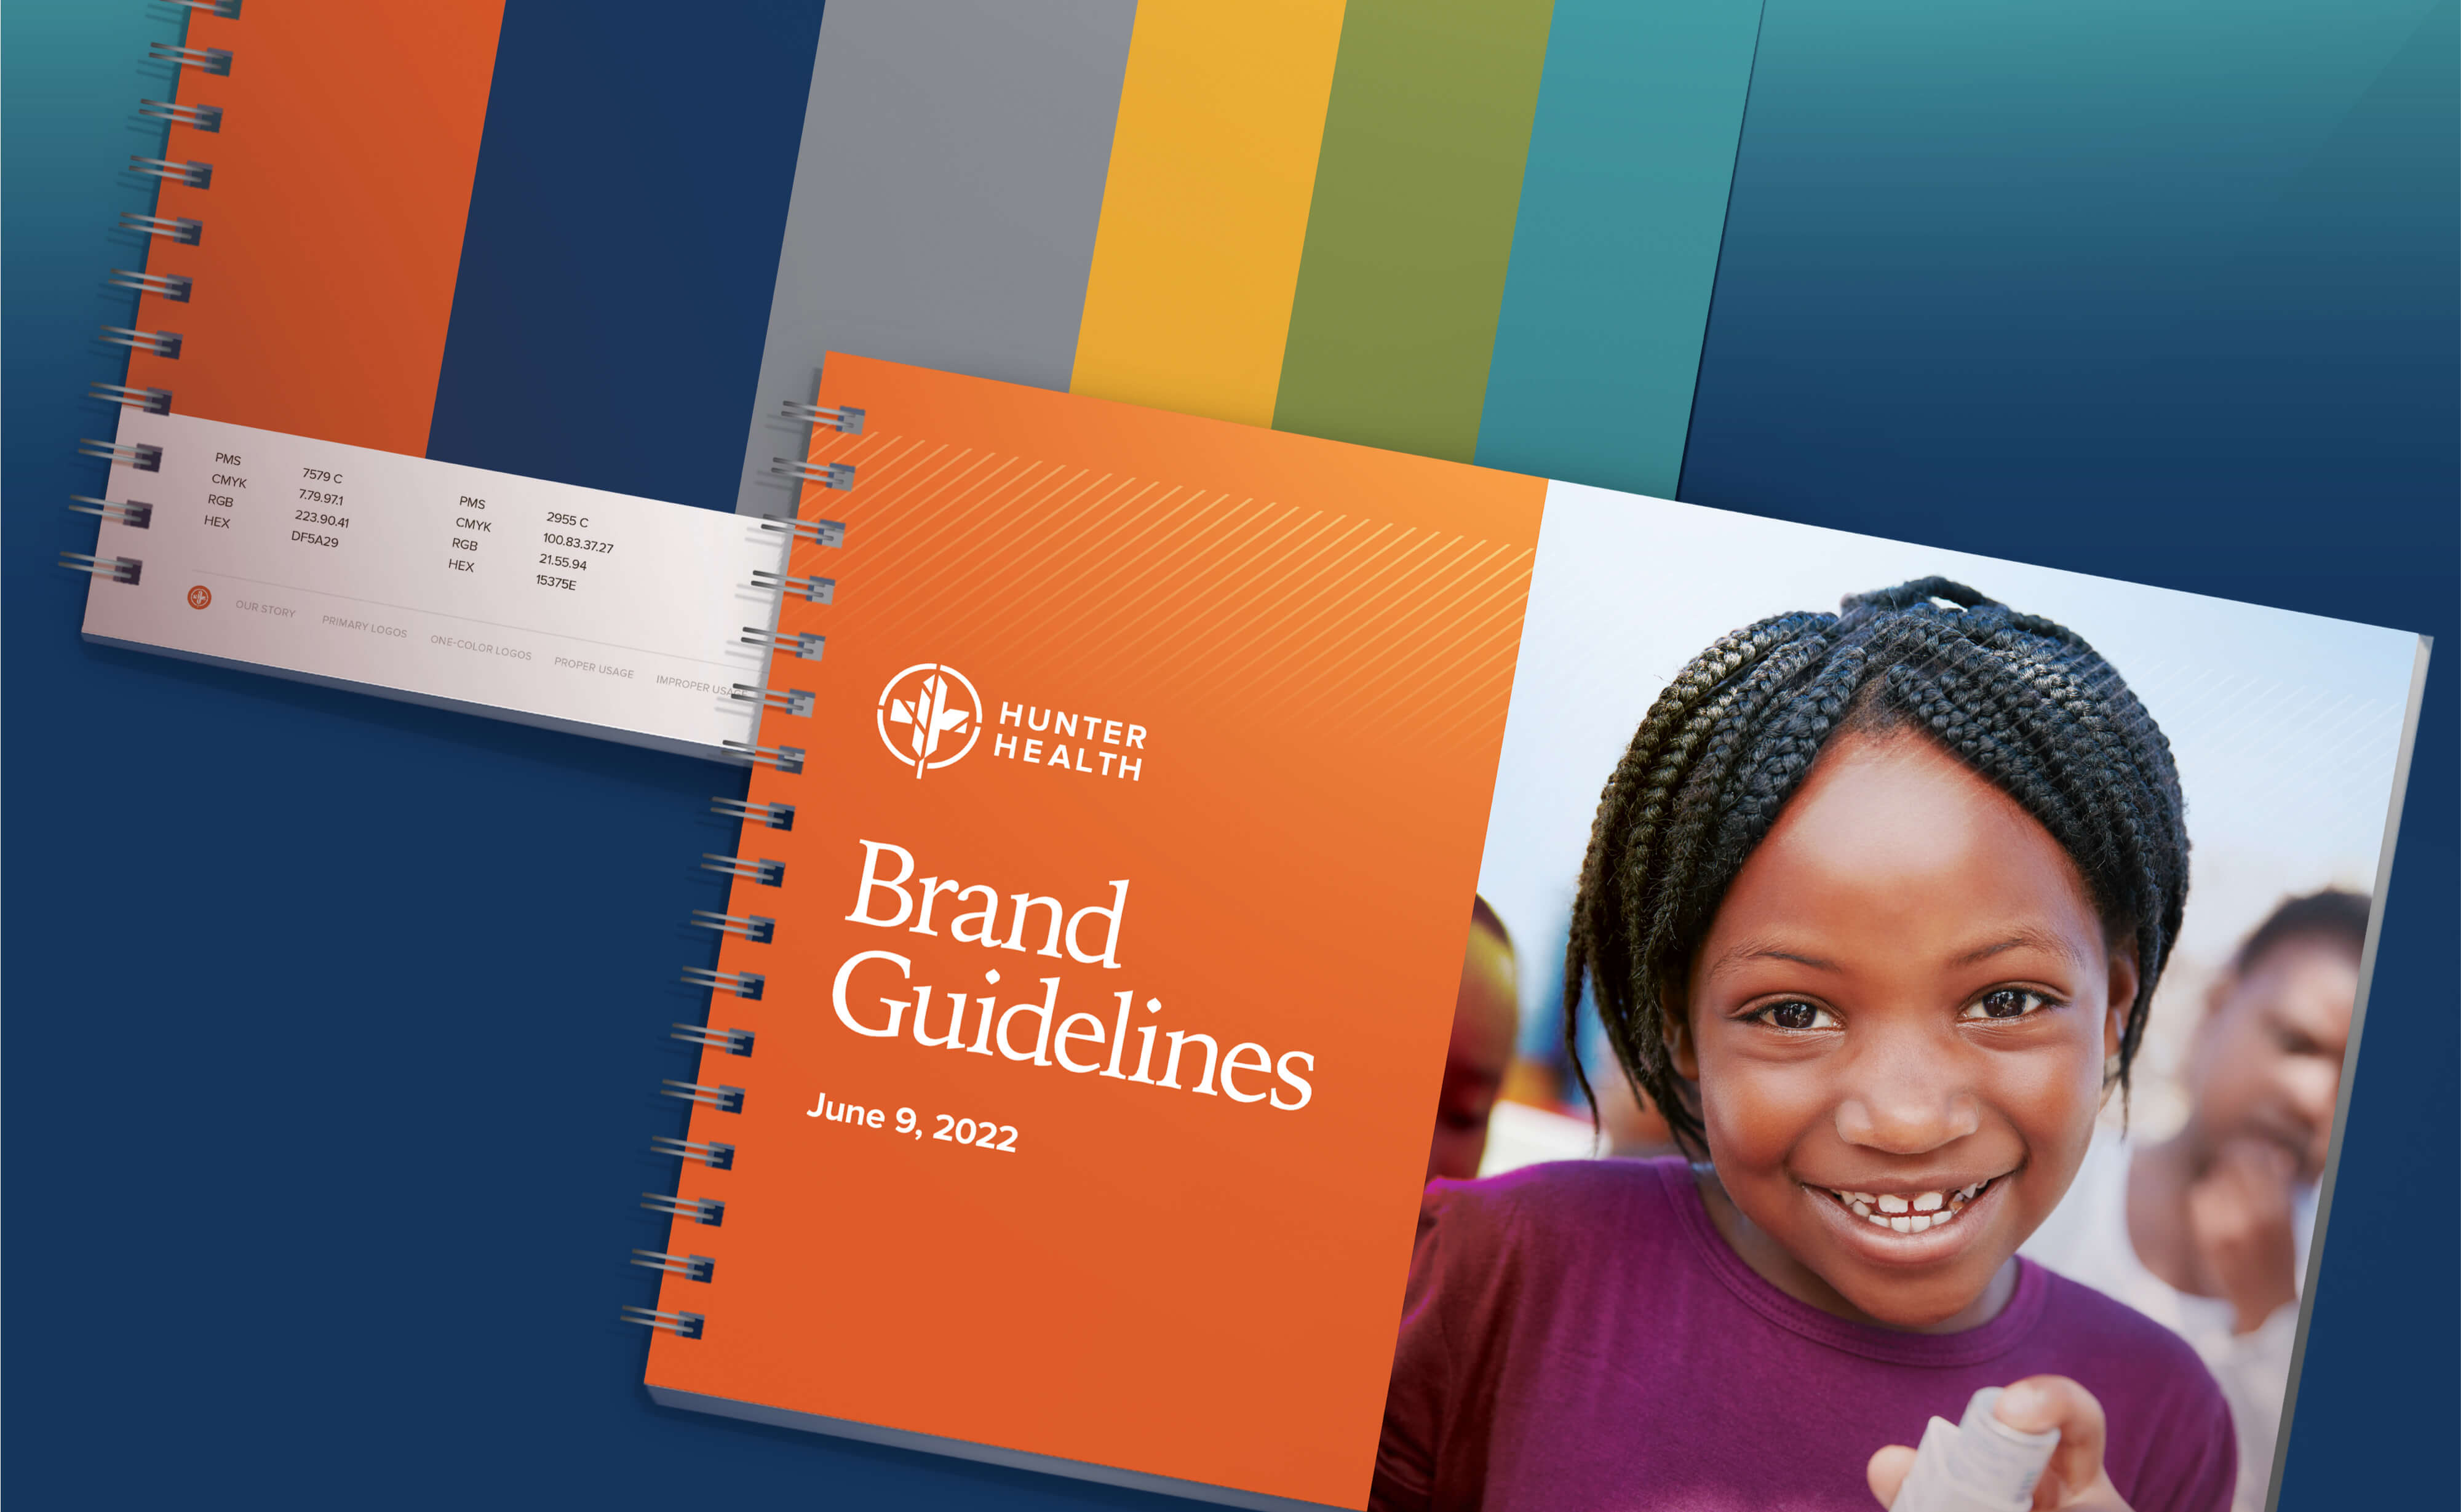 Hunter Health brand guidelines material